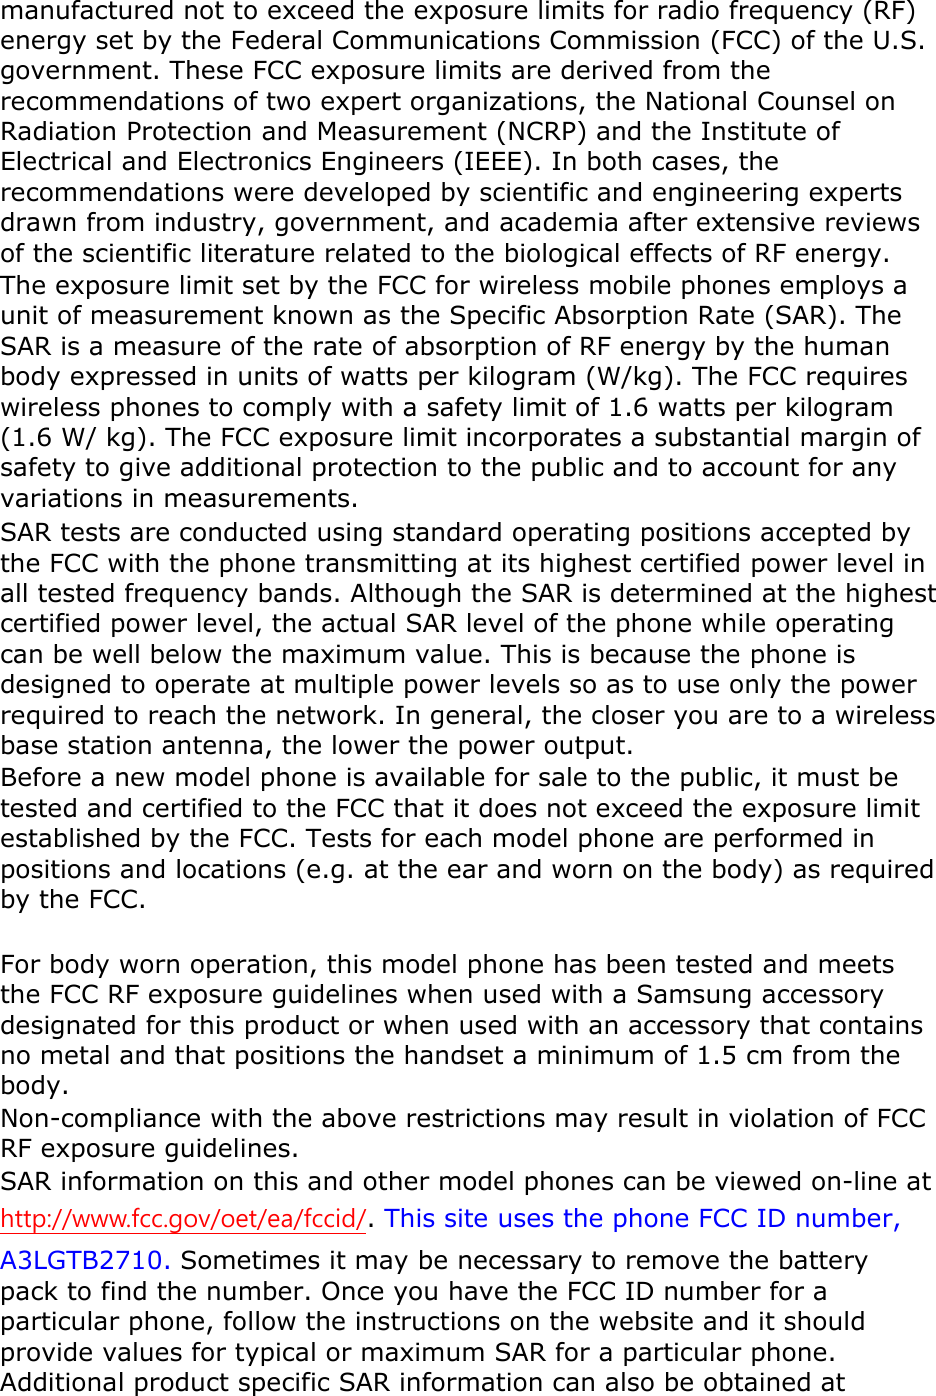 manufactured not to exceed the exposure limits for radio frequency (RF) energy set by the Federal Communications Commission (FCC) of the U.S. government. These FCC exposure limits are derived from the recommendations of two expert organizations, the National Counsel on Radiation Protection and Measurement (NCRP) and the Institute of Electrical and Electronics Engineers (IEEE). In both cases, the recommendations were developed by scientific and engineering experts drawn from industry, government, and academia after extensive reviews of the scientific literature related to the biological effects of RF energy. The exposure limit set by the FCC for wireless mobile phones employs a unit of measurement known as the Specific Absorption Rate (SAR). The SAR is a measure of the rate of absorption of RF energy by the human body expressed in units of watts per kilogram (W/kg). The FCC requires wireless phones to comply with a safety limit of 1.6 watts per kilogram (1.6 W/ kg). The FCC exposure limit incorporates a substantial margin of safety to give additional protection to the public and to account for any variations in measurements. SAR tests are conducted using standard operating positions accepted by the FCC with the phone transmitting at its highest certified power level in all tested frequency bands. Although the SAR is determined at the highest certified power level, the actual SAR level of the phone while operating can be well below the maximum value. This is because the phone is designed to operate at multiple power levels so as to use only the power required to reach the network. In general, the closer you are to a wireless base station antenna, the lower the power output. Before a new model phone is available for sale to the public, it must be tested and certified to the FCC that it does not exceed the exposure limit established by the FCC. Tests for each model phone are performed in positions and locations (e.g. at the ear and worn on the body) as required by the FCC.      For body worn operation, this model phone has been tested and meets the FCC RF exposure guidelines when used with a Samsung accessory designated for this product or when used with an accessory that contains no metal and that positions the handset a minimum of 1.5 cm from the body.   Non-compliance with the above restrictions may result in violation of FCC RF exposure guidelines. SAR information on this and other model phones can be viewed on-line at http://www.fcc.gov/oet/ea/fccid/. This site uses the phone FCC ID number, A3LGTB2710. Sometimes it may be necessary to remove the battery pack to find the number. Once you have the FCC ID number for a particular phone, follow the instructions on the website and it should provide values for typical or maximum SAR for a particular phone. Additional product specific SAR information can also be obtained at 